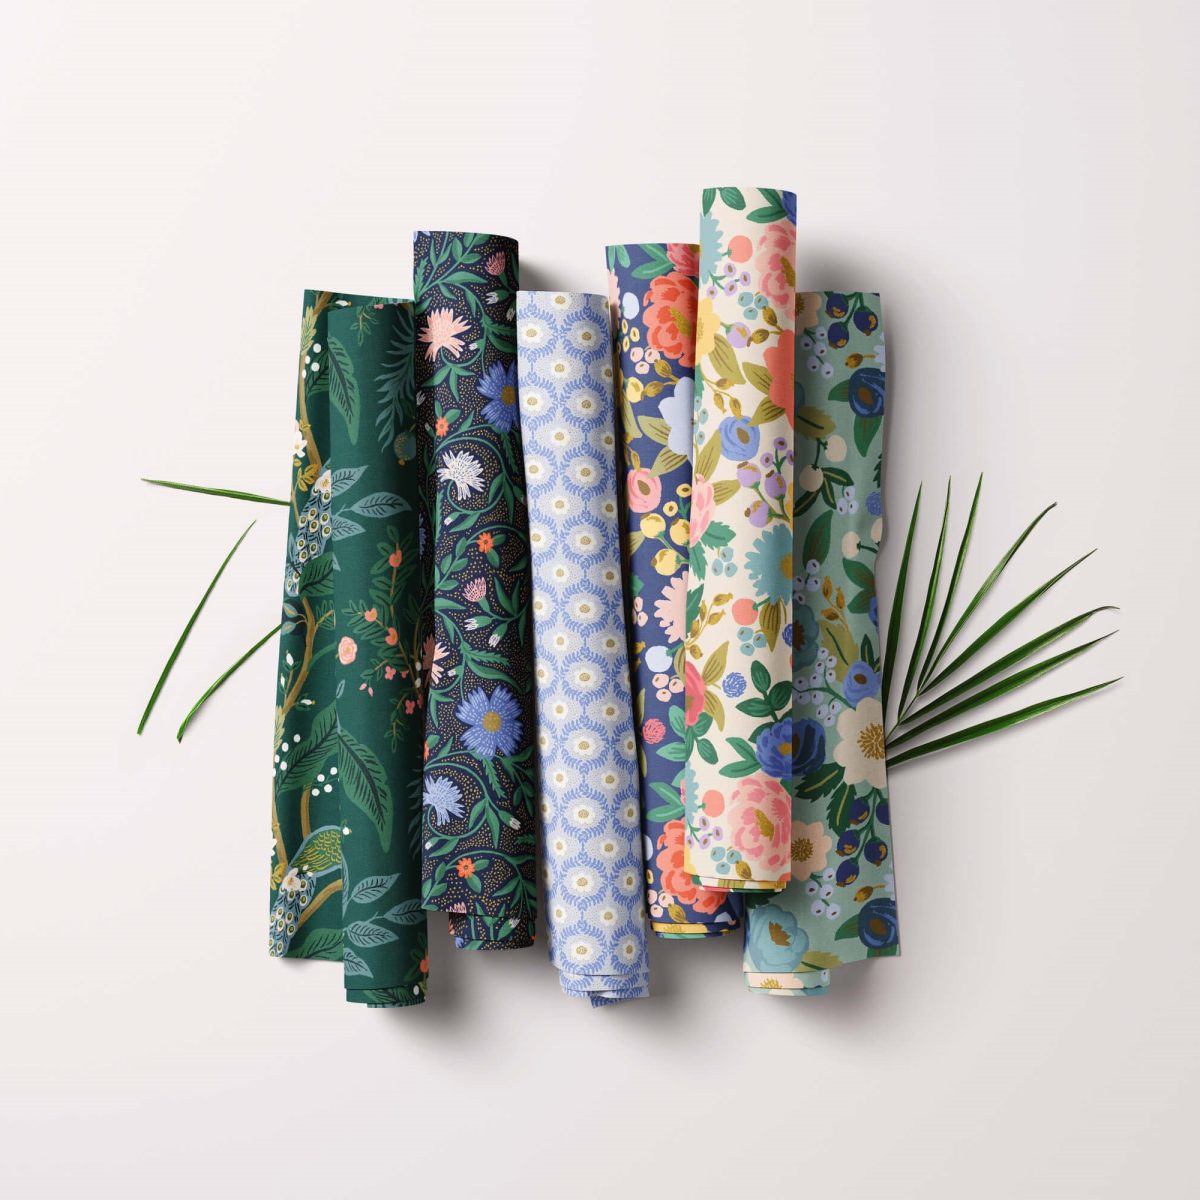 Vintage Garden by Rifle Paper Co